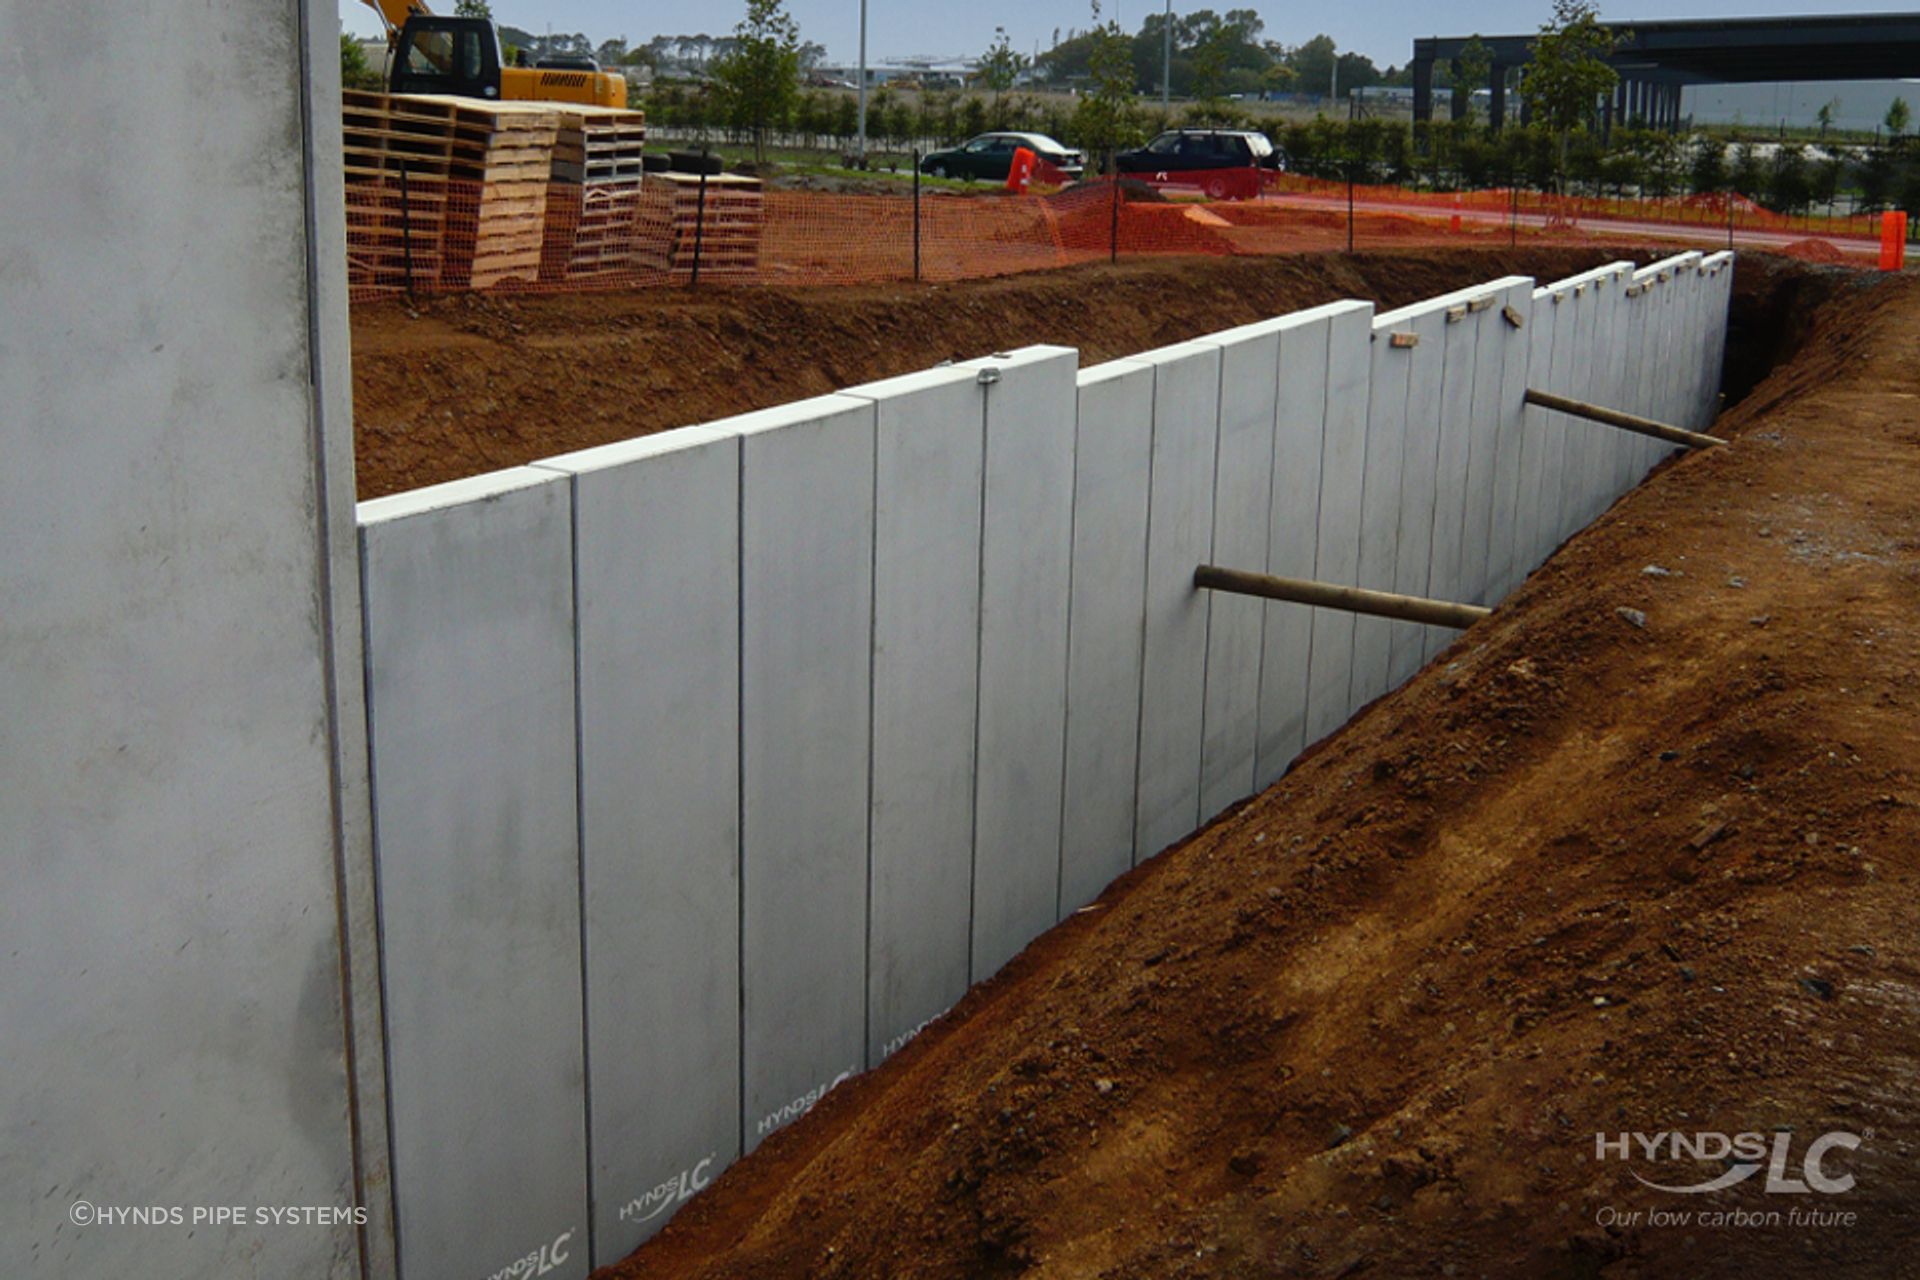 The Hynds LC range can be used to build retaining walls like this one.